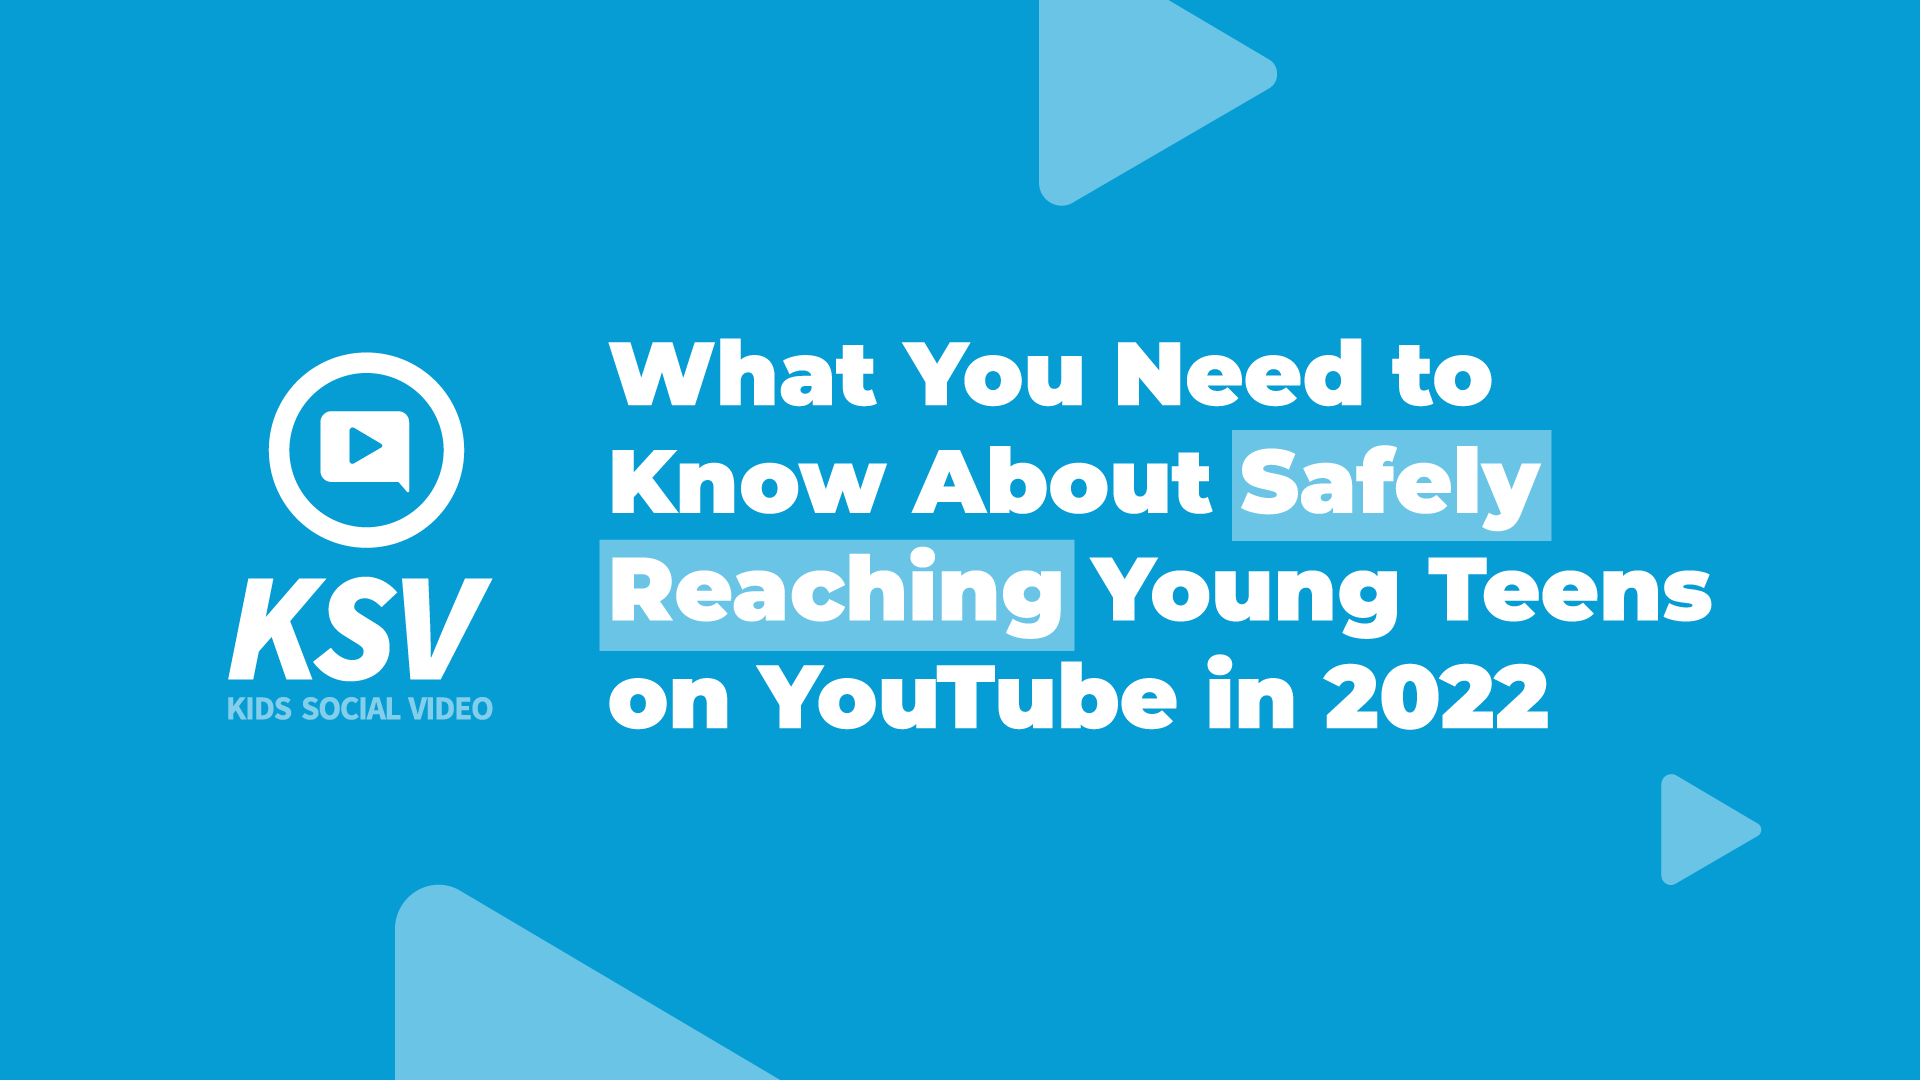 What You Need to Know About Safely Reaching Young Teens on YouTube in 2022